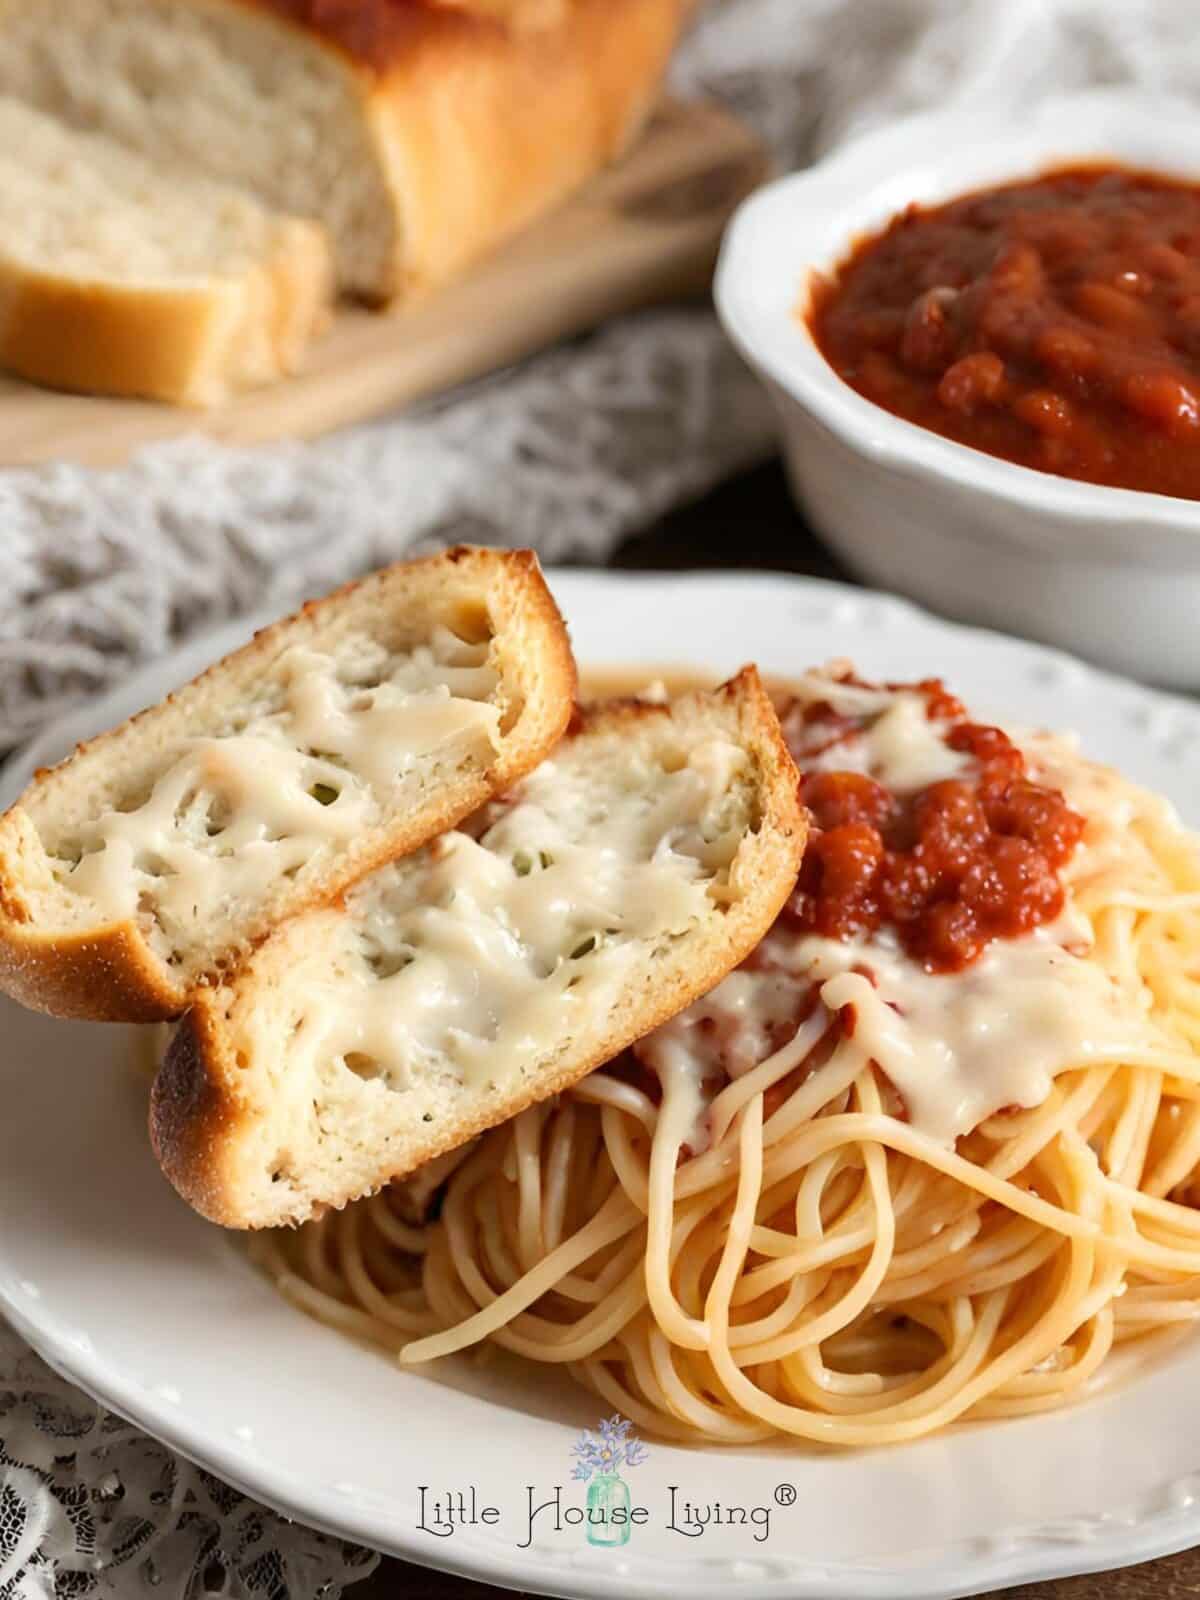 Cheesy French bread on top of spaghetti.